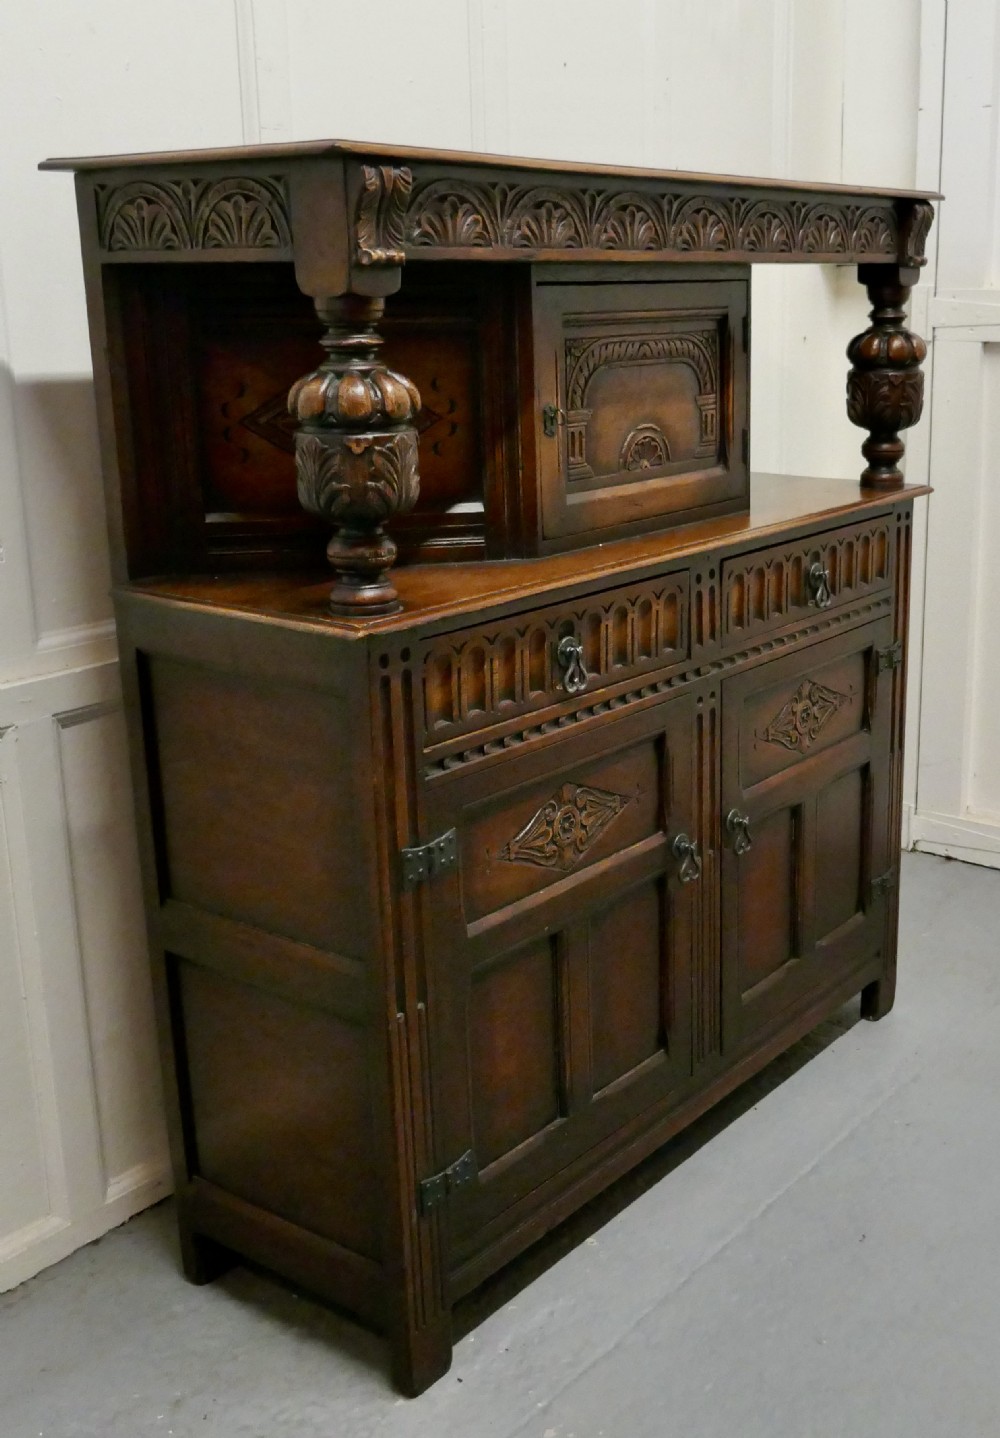 19th century arts and crafts gothic carved oak court cupboard